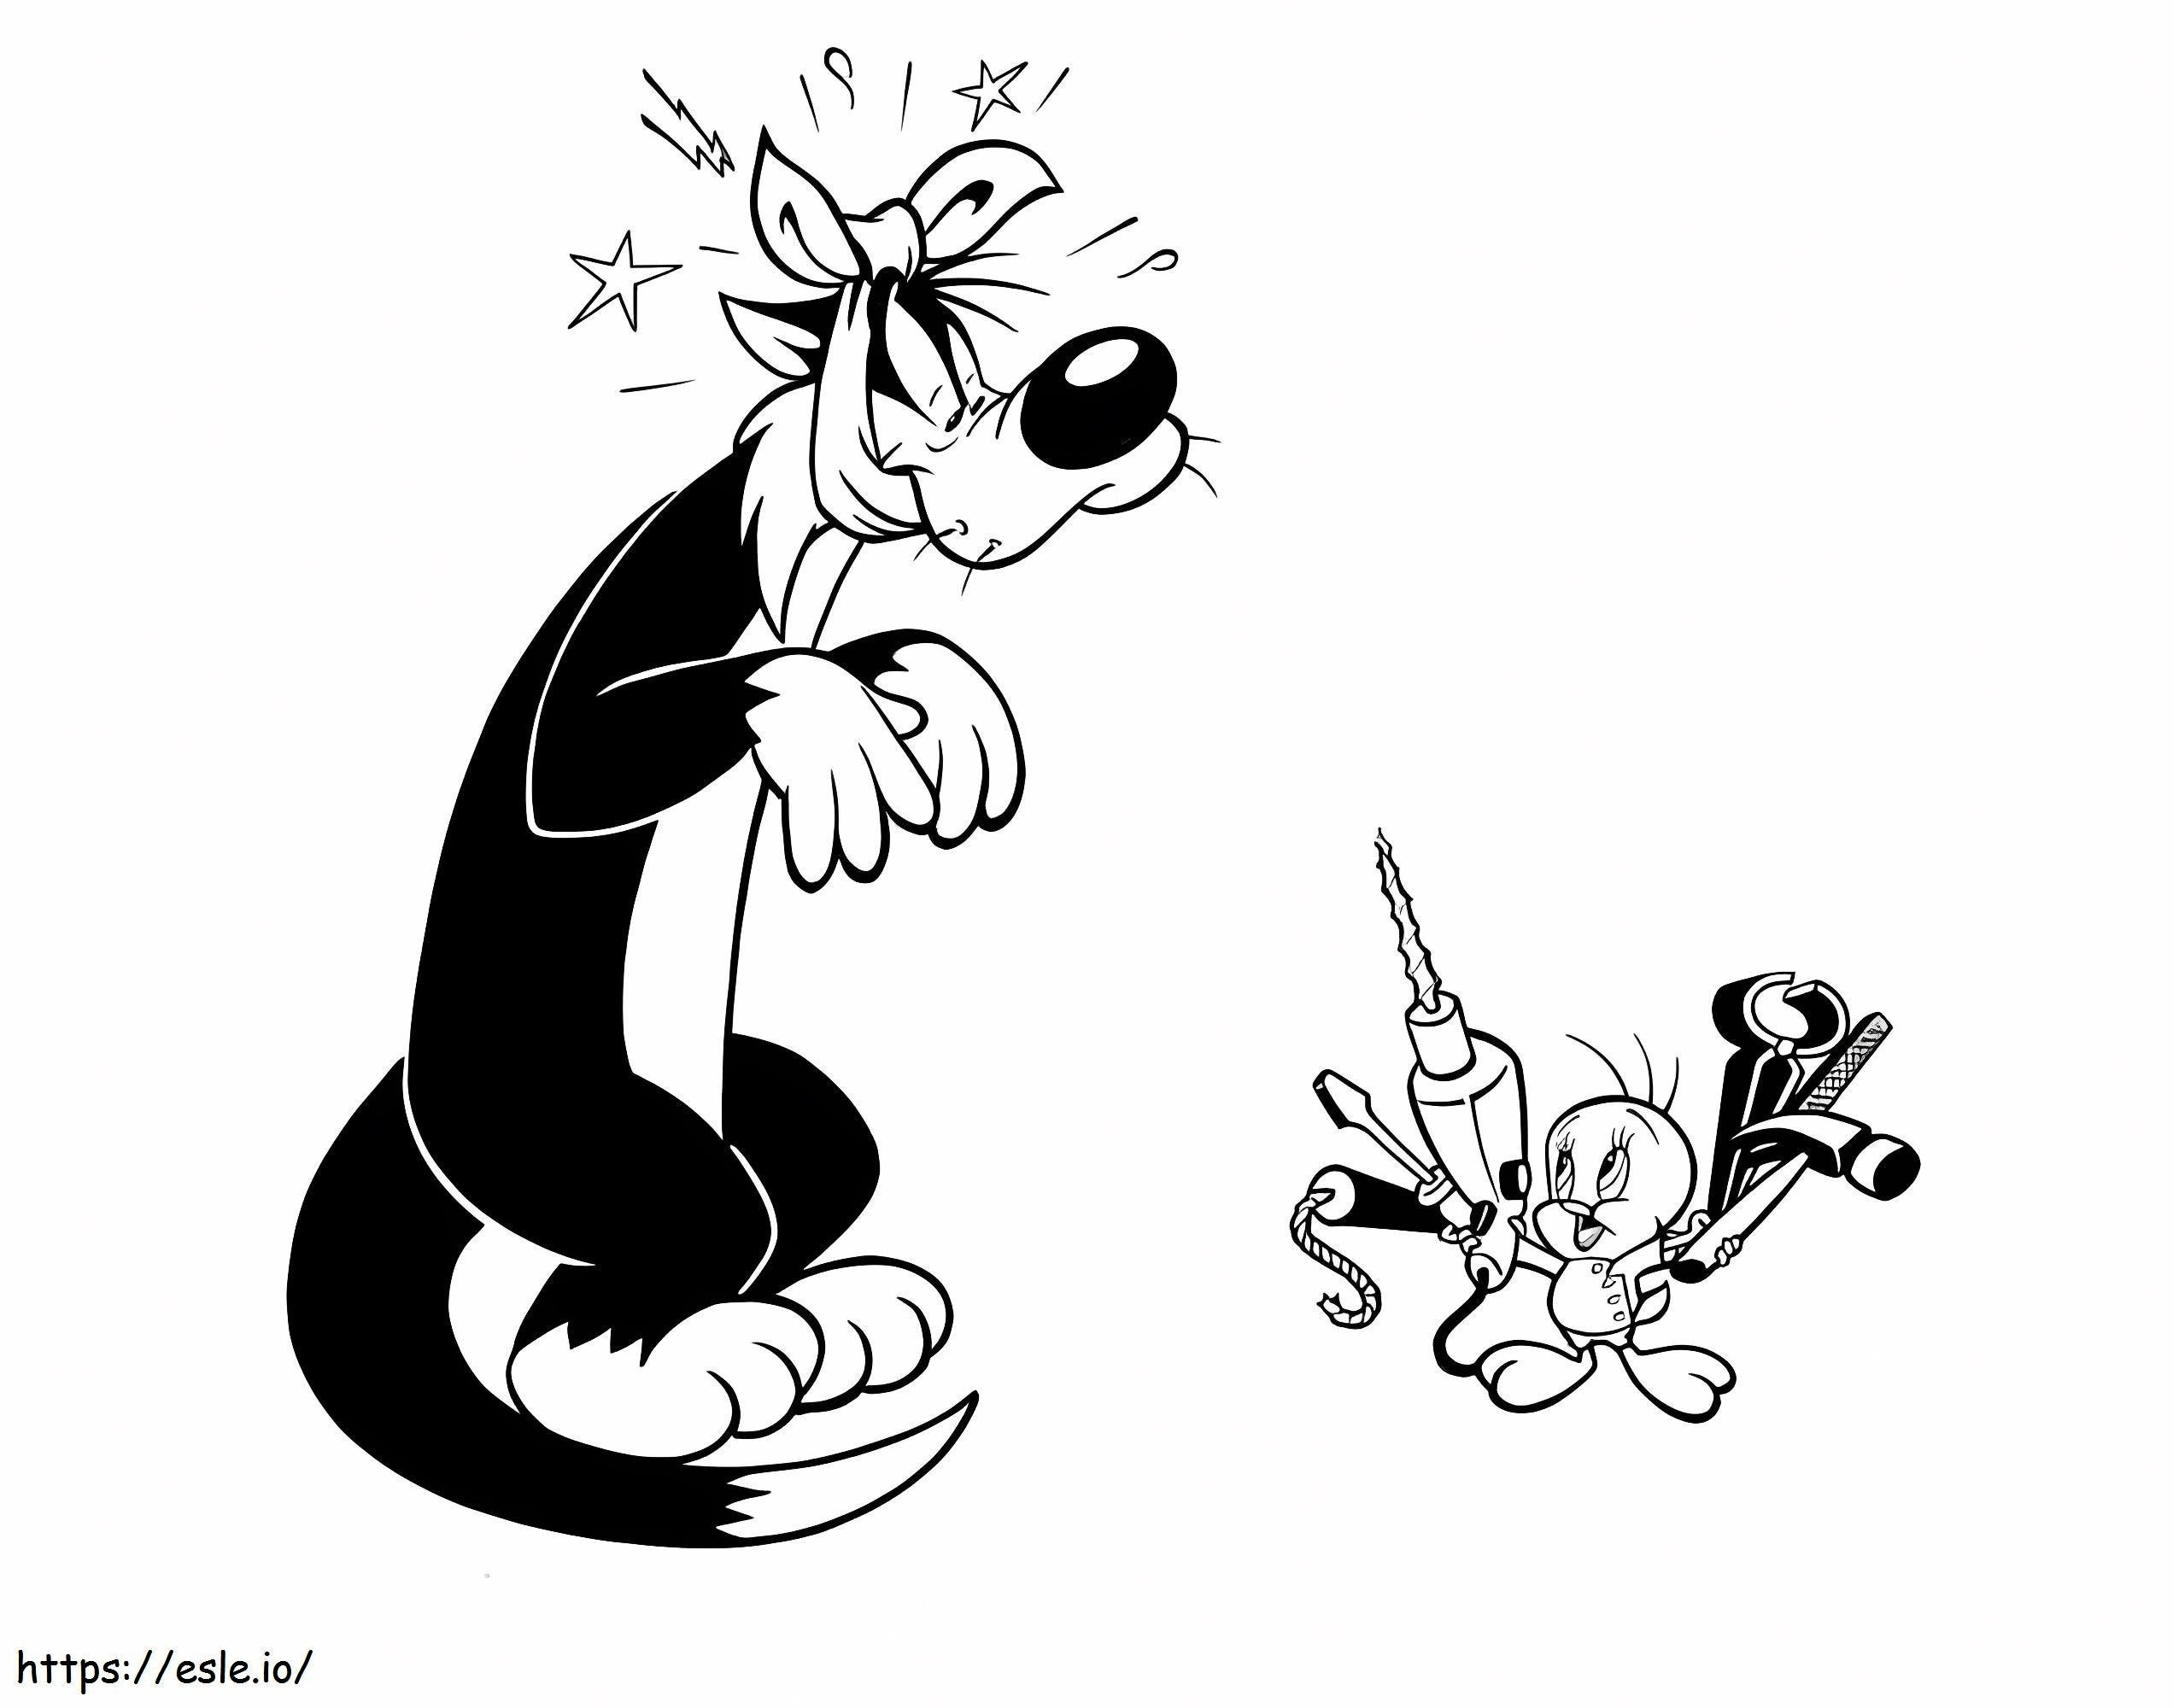 Sylvester 4 coloring page